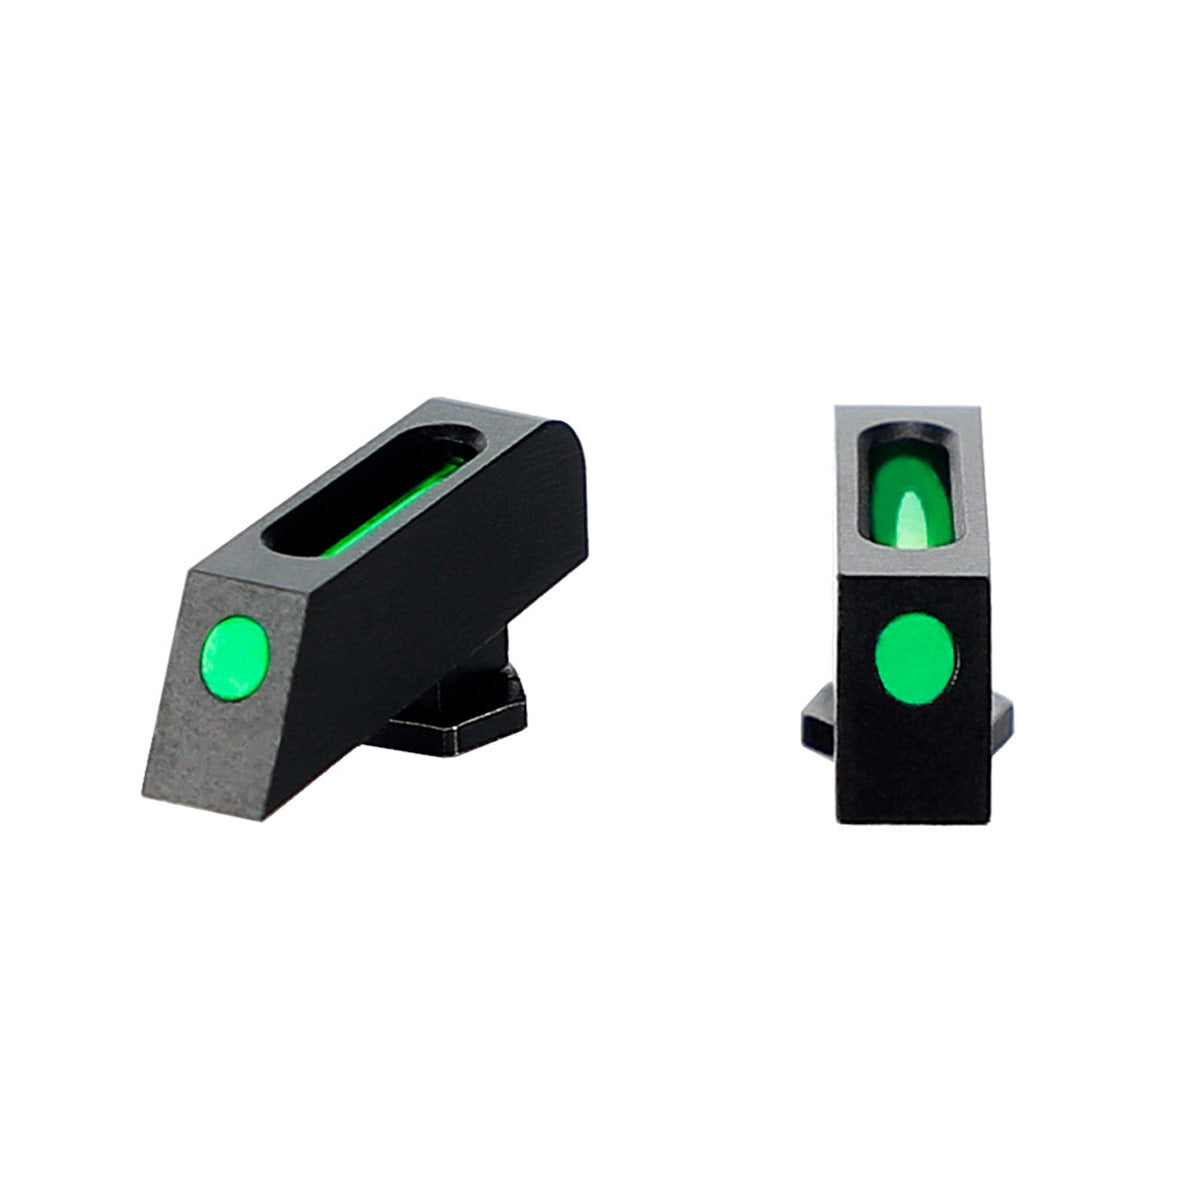 ohhunt® Night Sights Green Red Fiber Optic Sight Kits Front & Rear Sights for Glock Pistols 17L, 19, 22, 23, 24, 26, 27, 33, 34, 35, 38 and 39